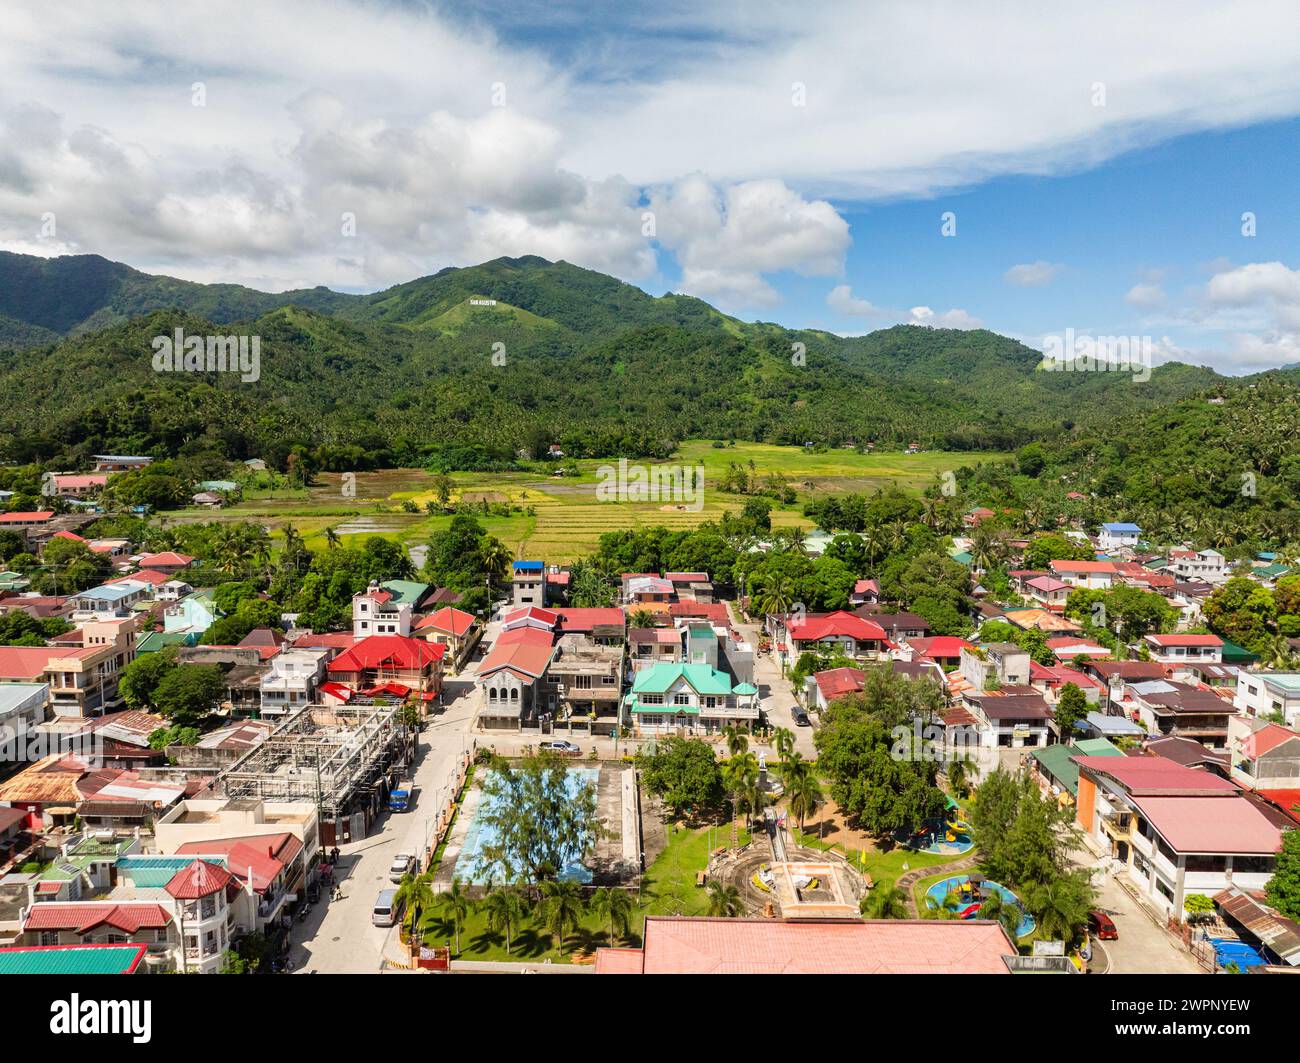 Buildings and houses in town city of San Agustin, Romblon. Blue sky and clouds. Philippines. Stock Photo